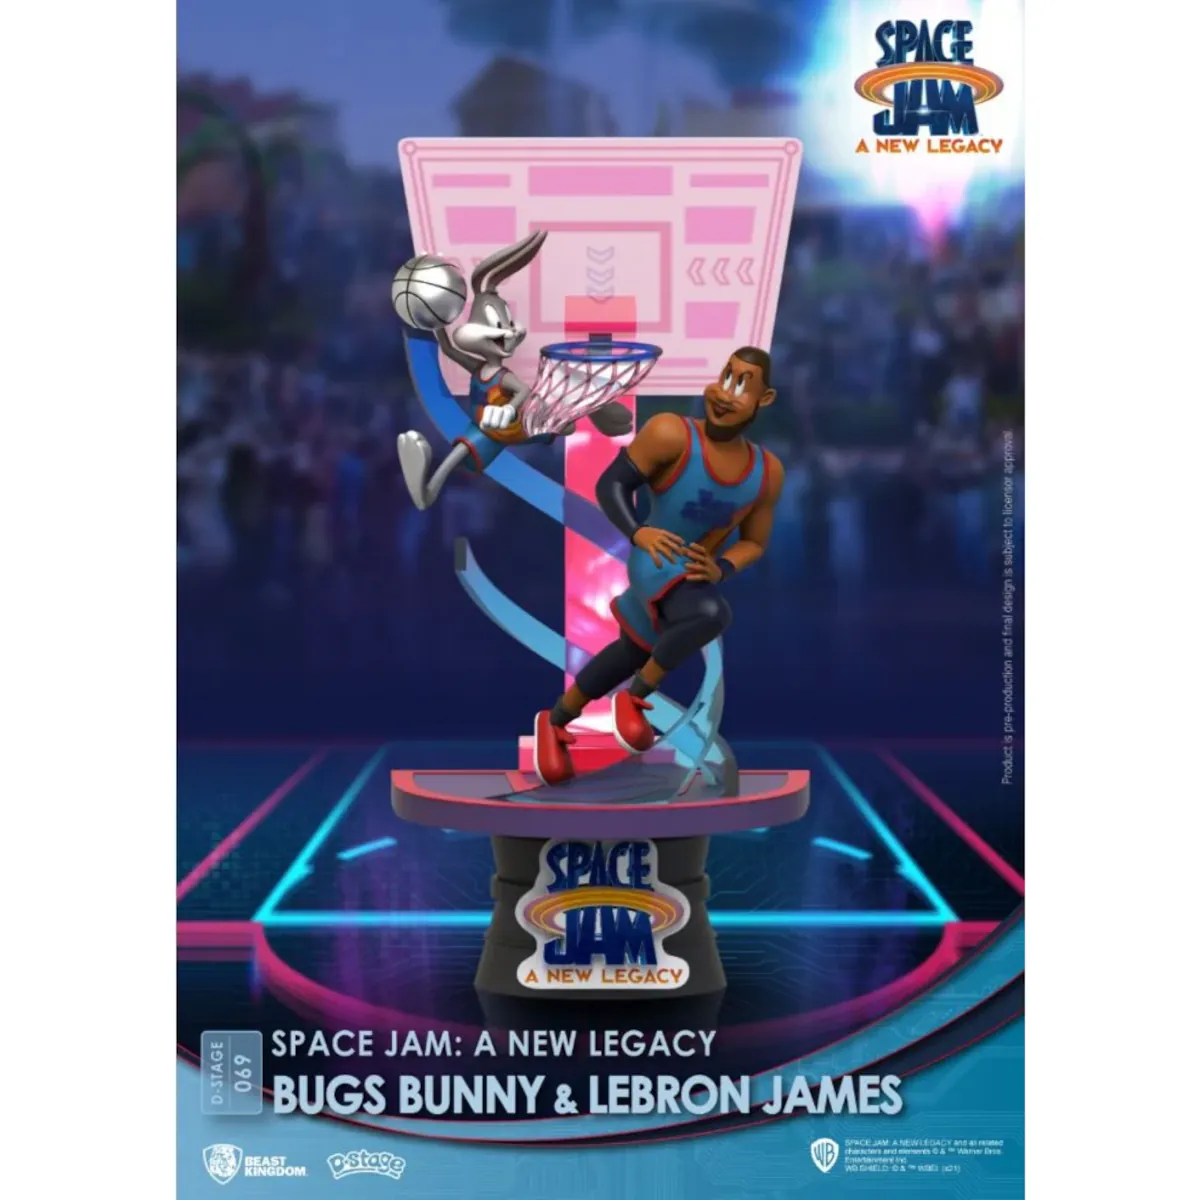 DS-069 Space Jam A New Legacy D-Stage 16cm Bugs Bunny & Lebron James PVC Diorama